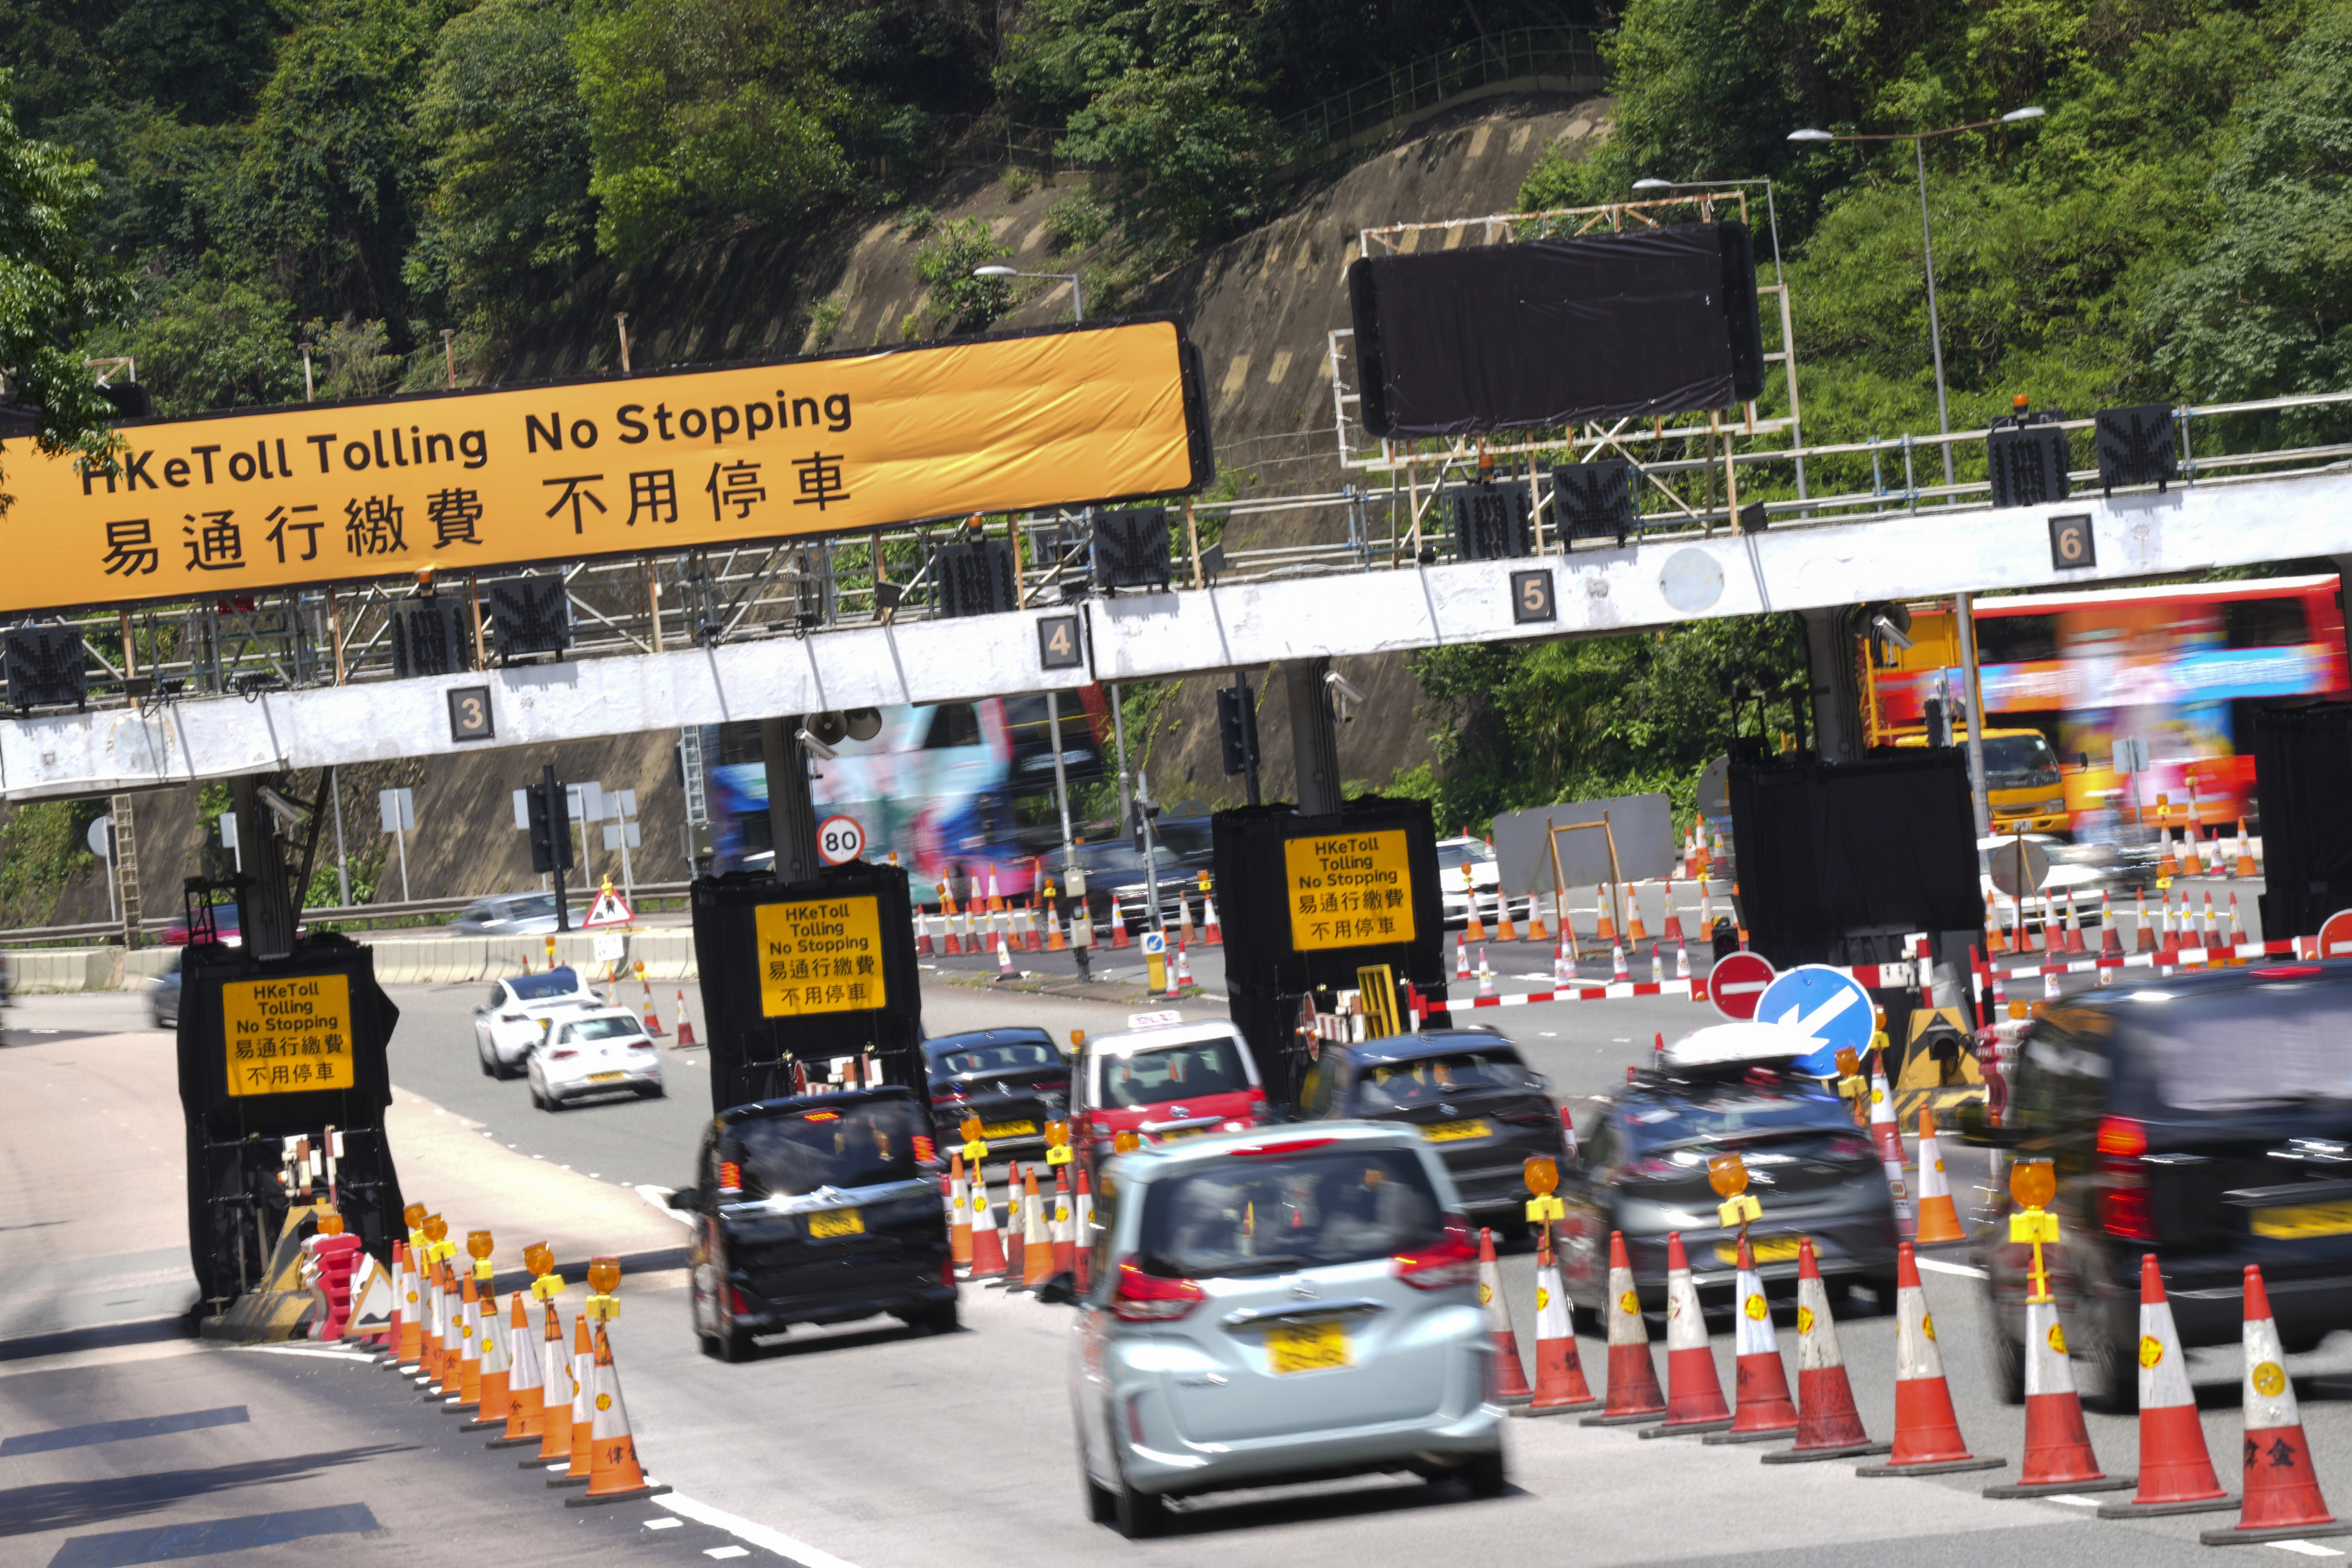 About 90,000 vehicles pass through the Lion Rock Tunnel on a daily basis. Photo: Elson Li